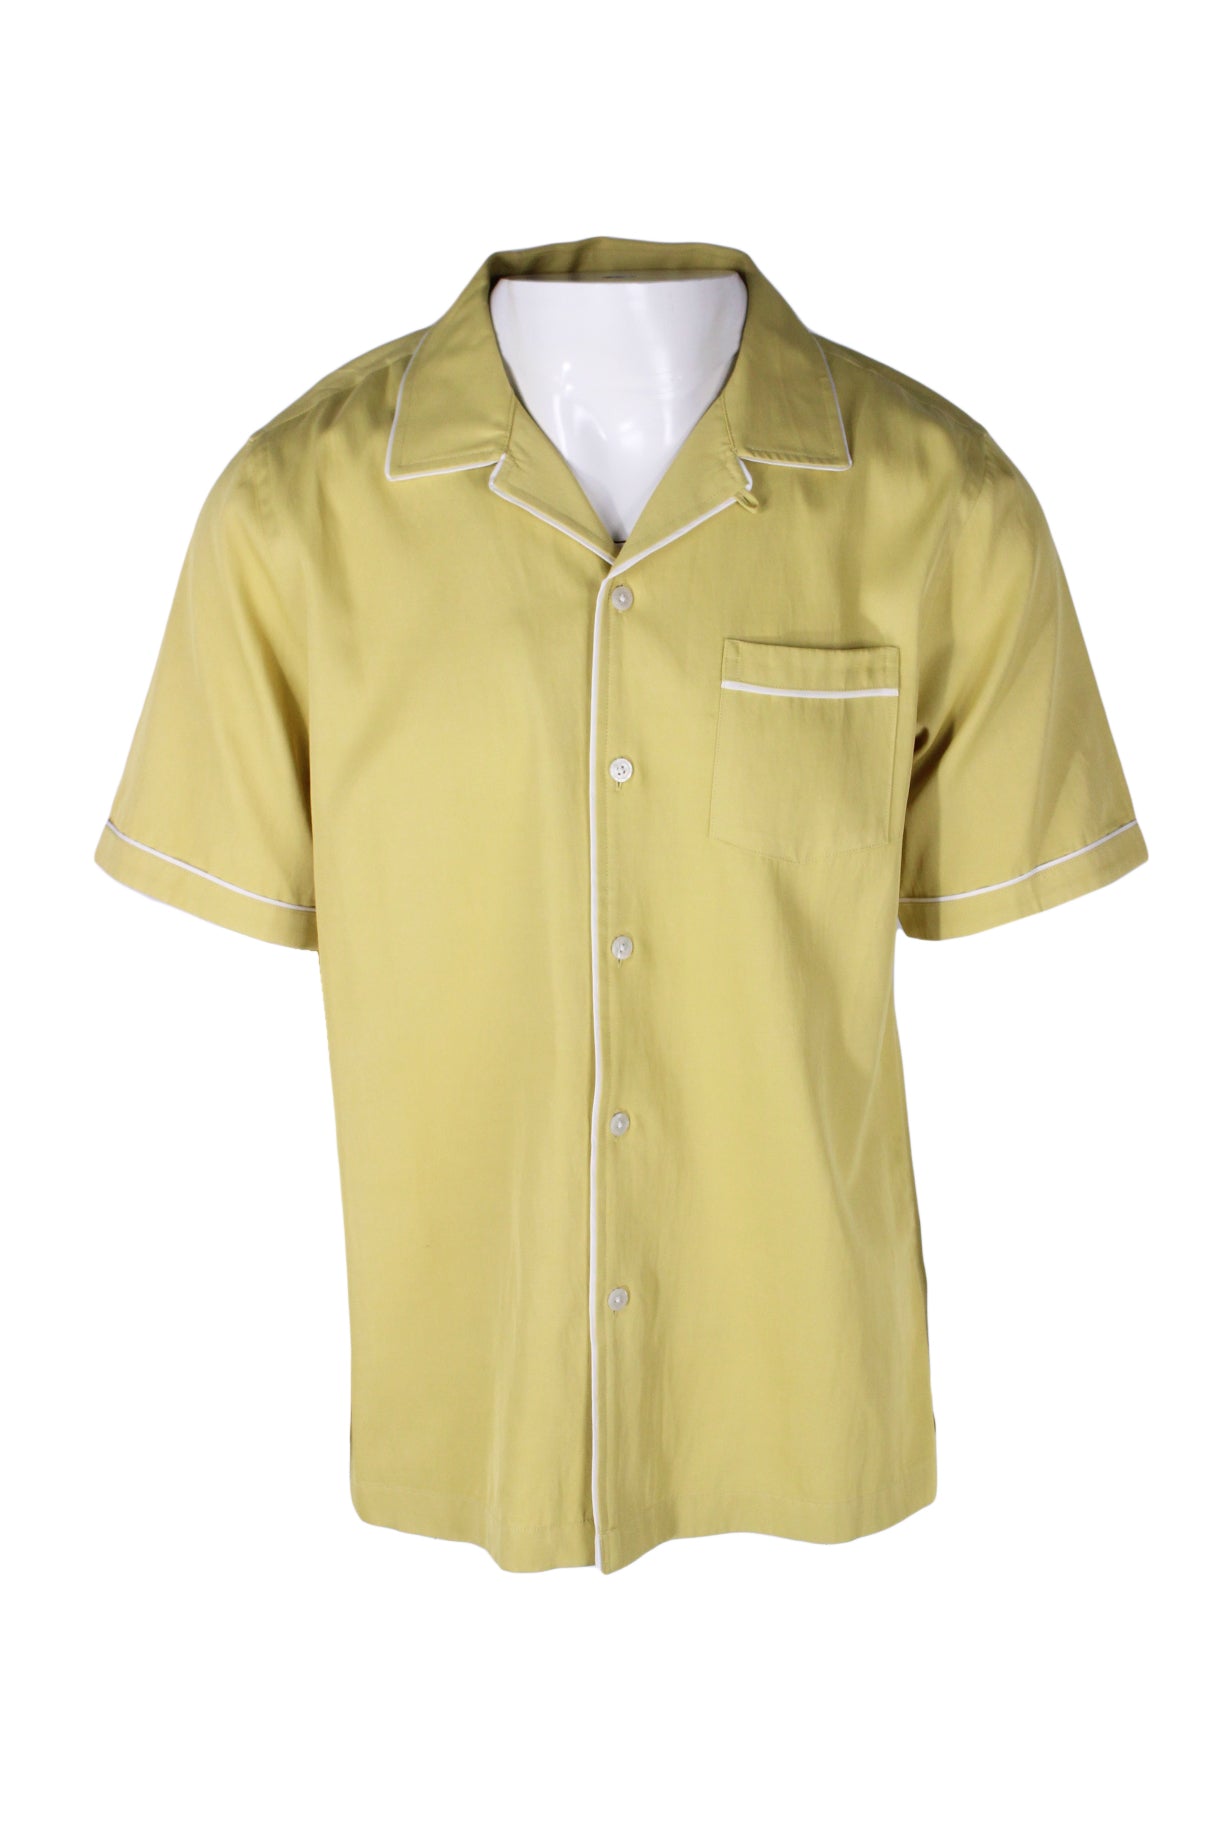 front angle todd snyder pale dijon short sleeve rayon lounge shirt on masculine mannequin torso featuring contrast tipping details, camp collar, chest patch pocket, front button closure.